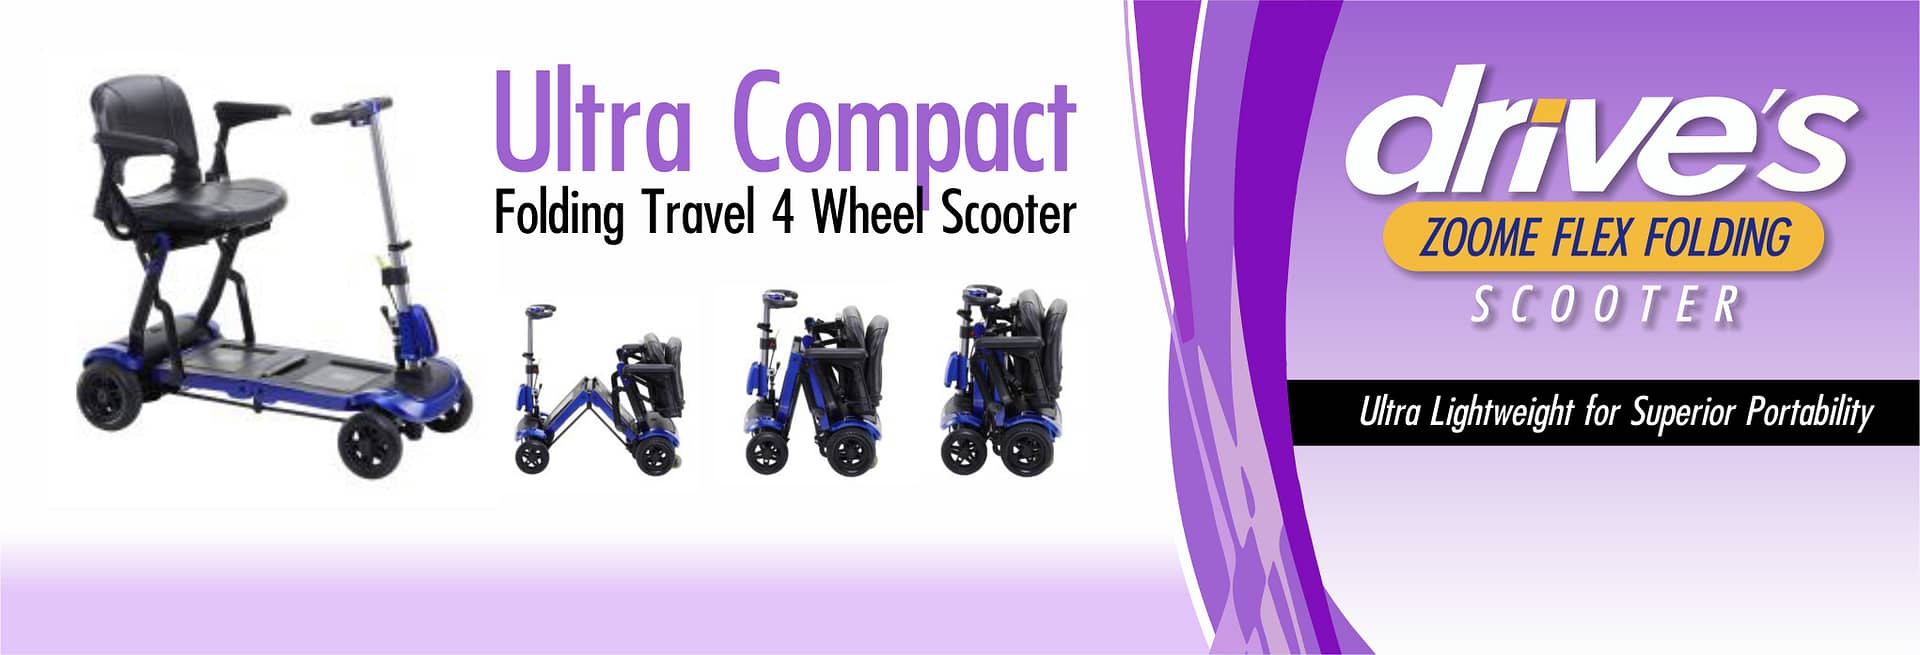 JPEG SIDNEY SCOOTERS – ULTRA COMPACT FOLDING TRAVEL 4 WHEEL SCOOTER IMAGE SLIDER